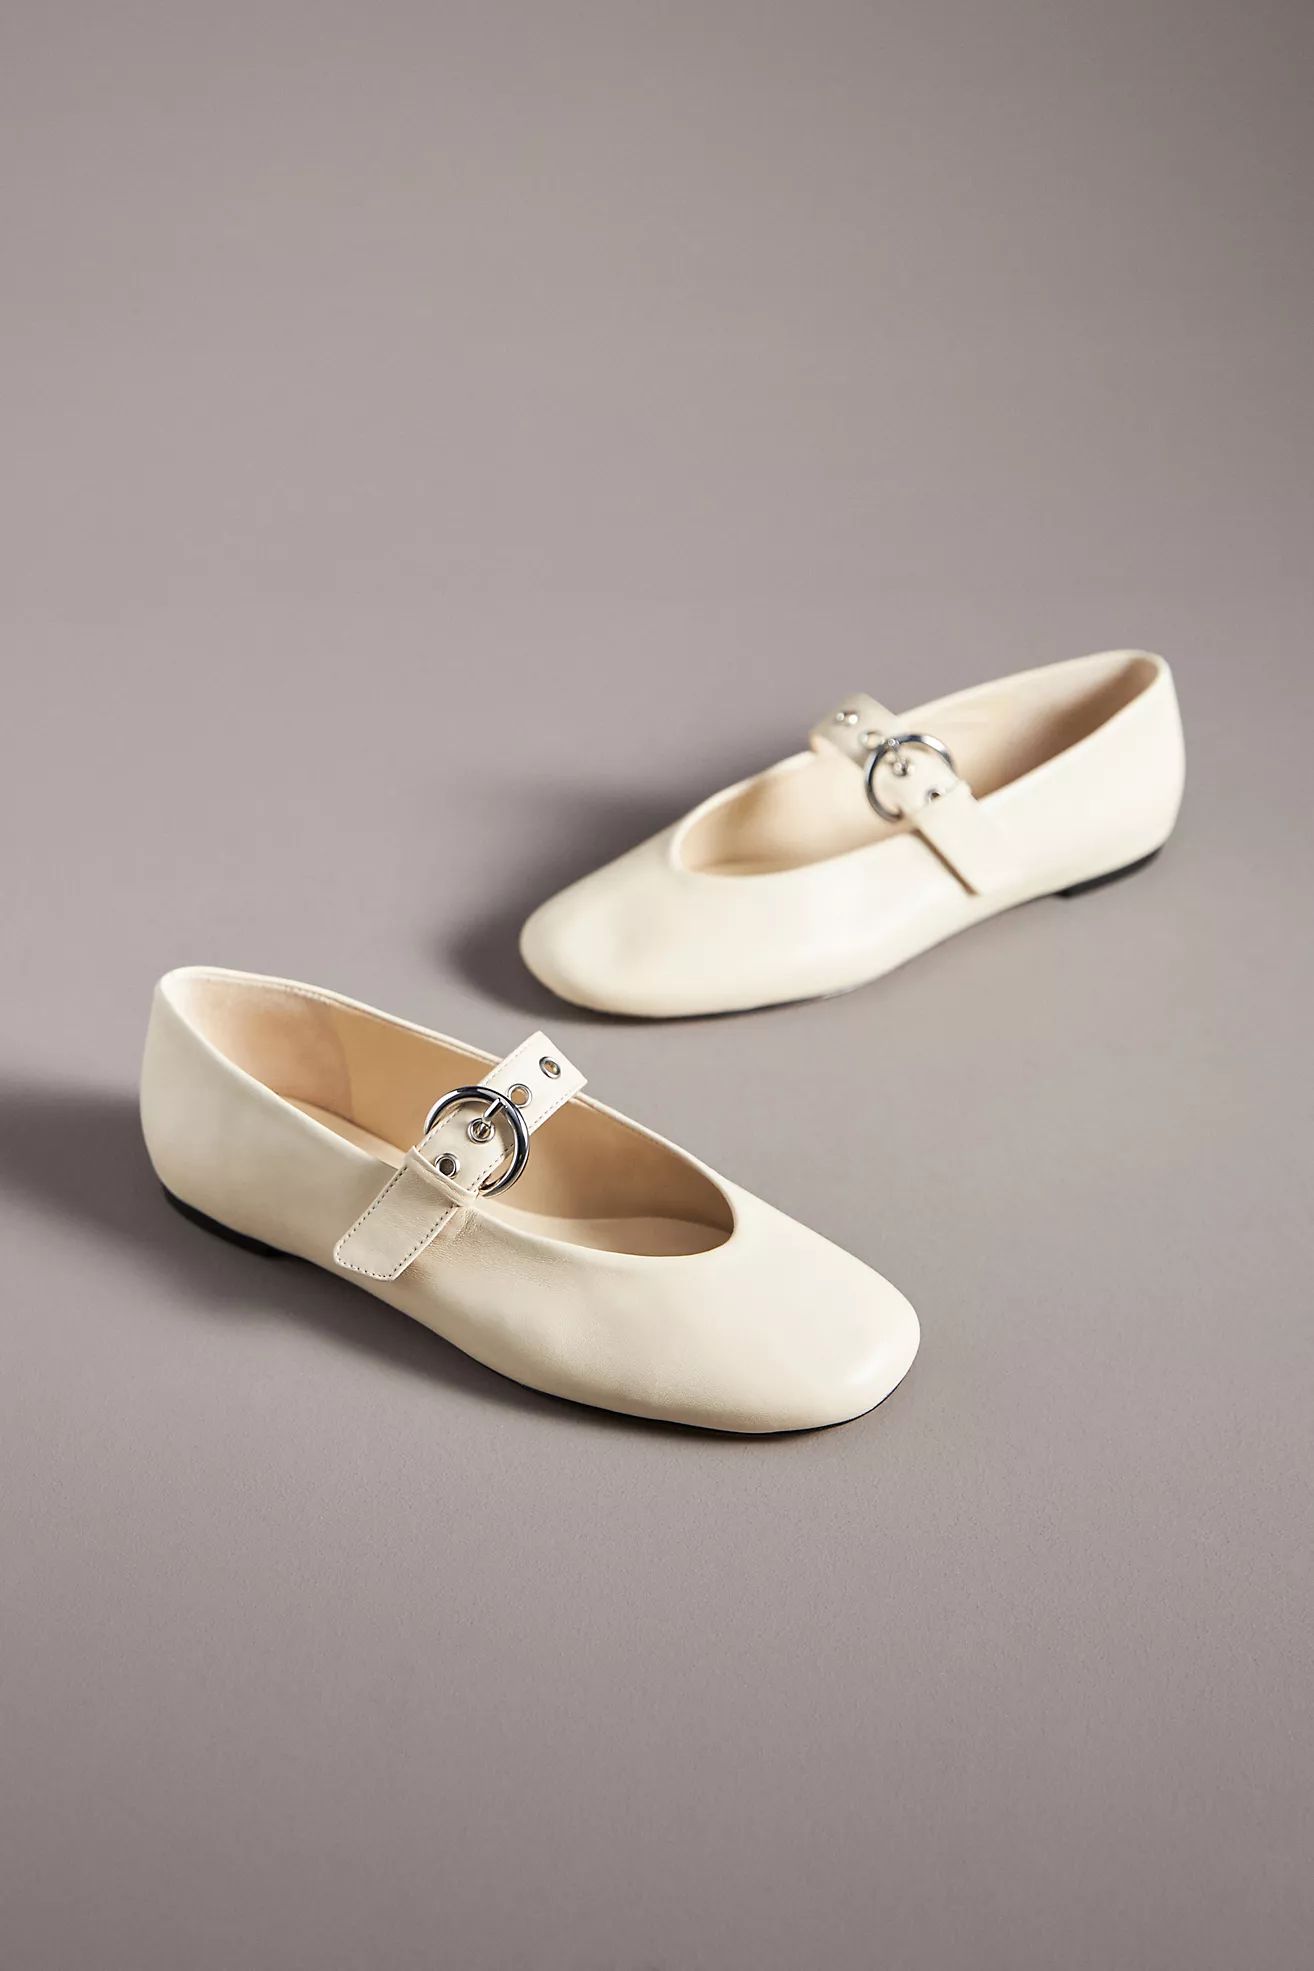 Reformation Bethany Flats | Anthropologie (US)